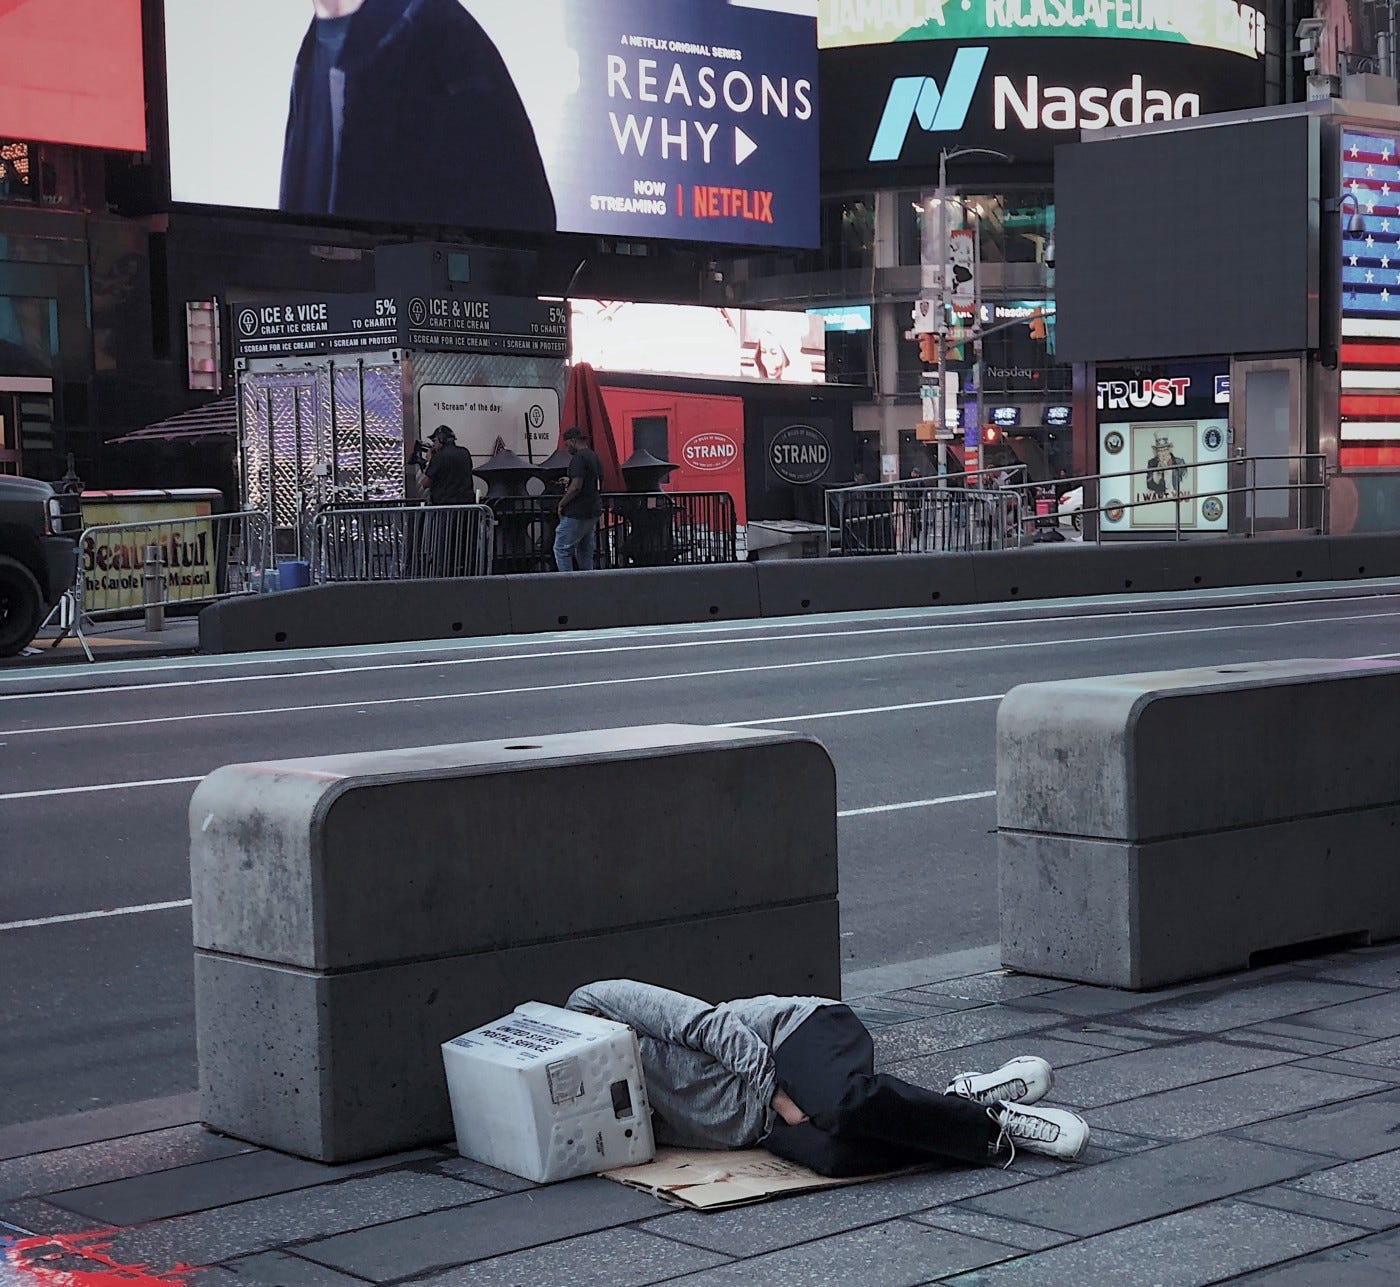 A photo of a man sleeping on the street in New York's Times Square.